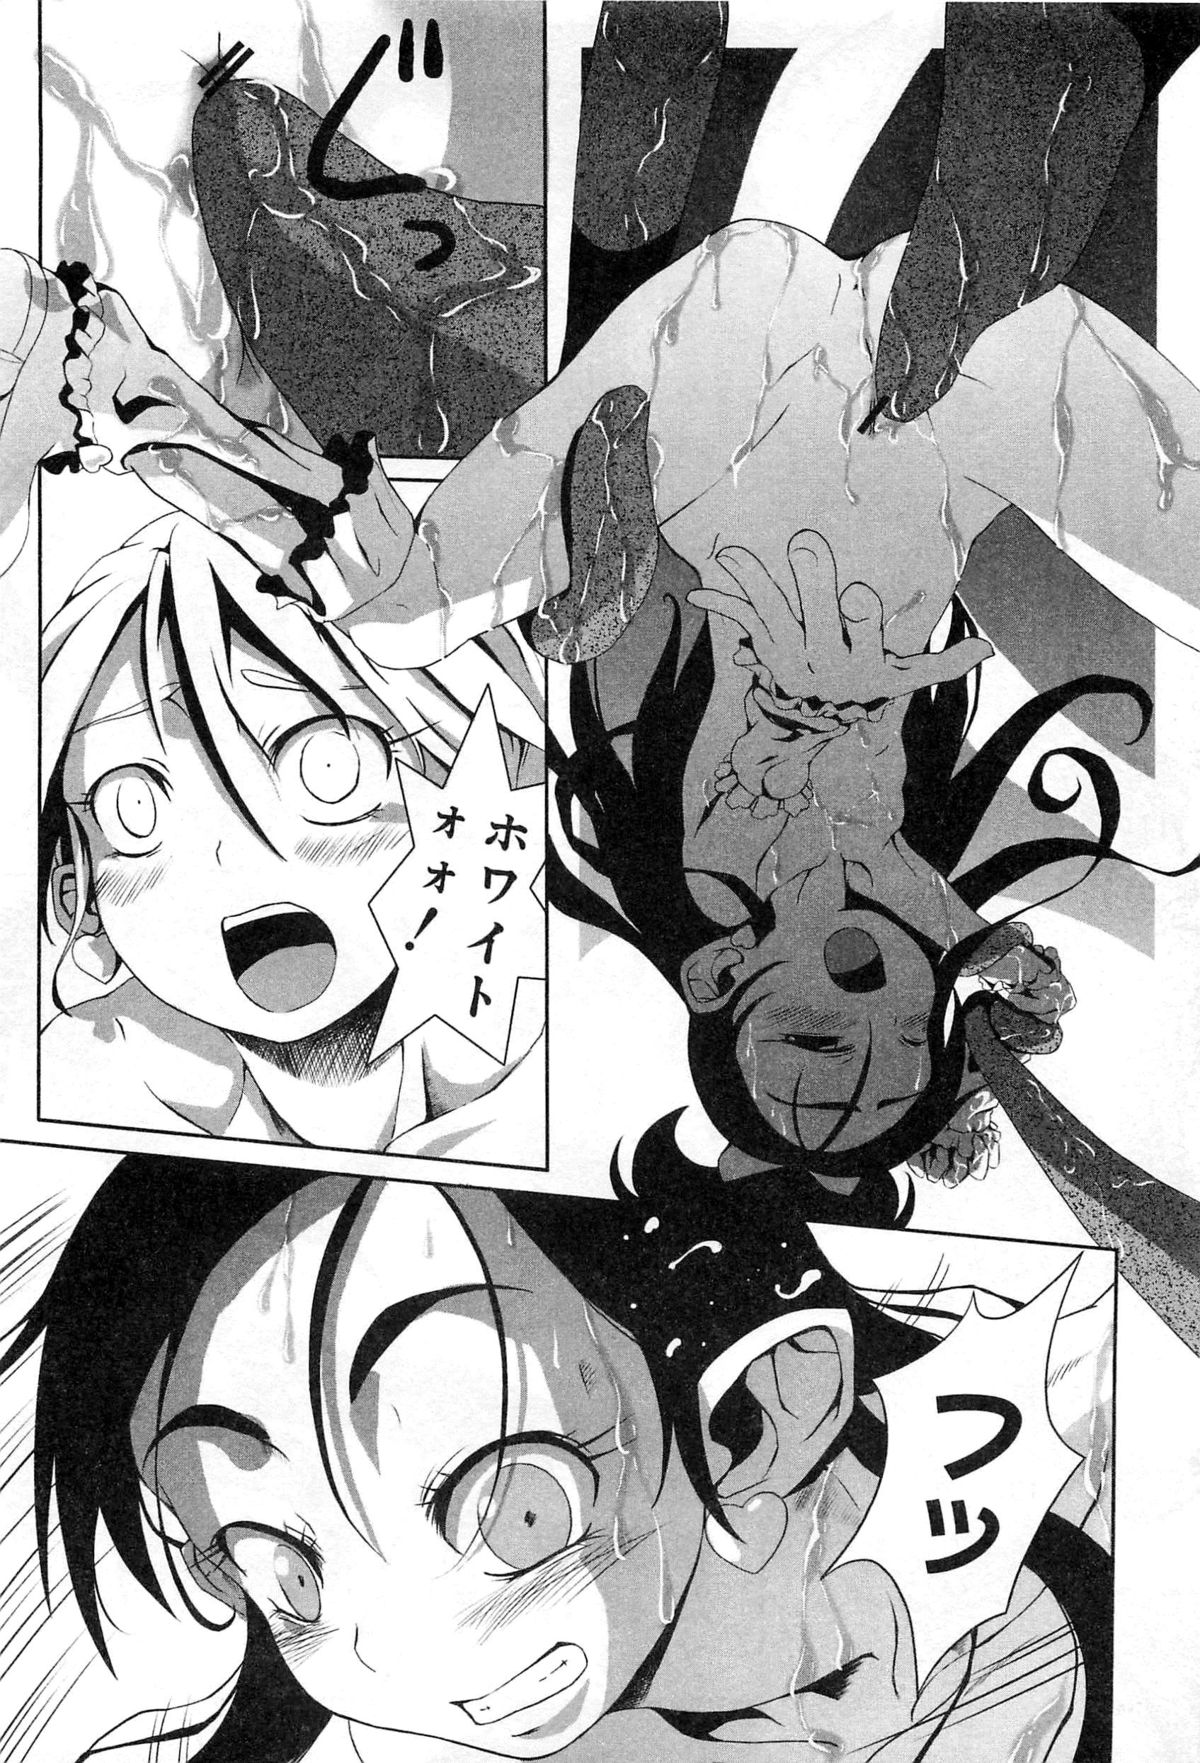 [Anthology] Cure Cure Battle Precure Eroparo page 19 full